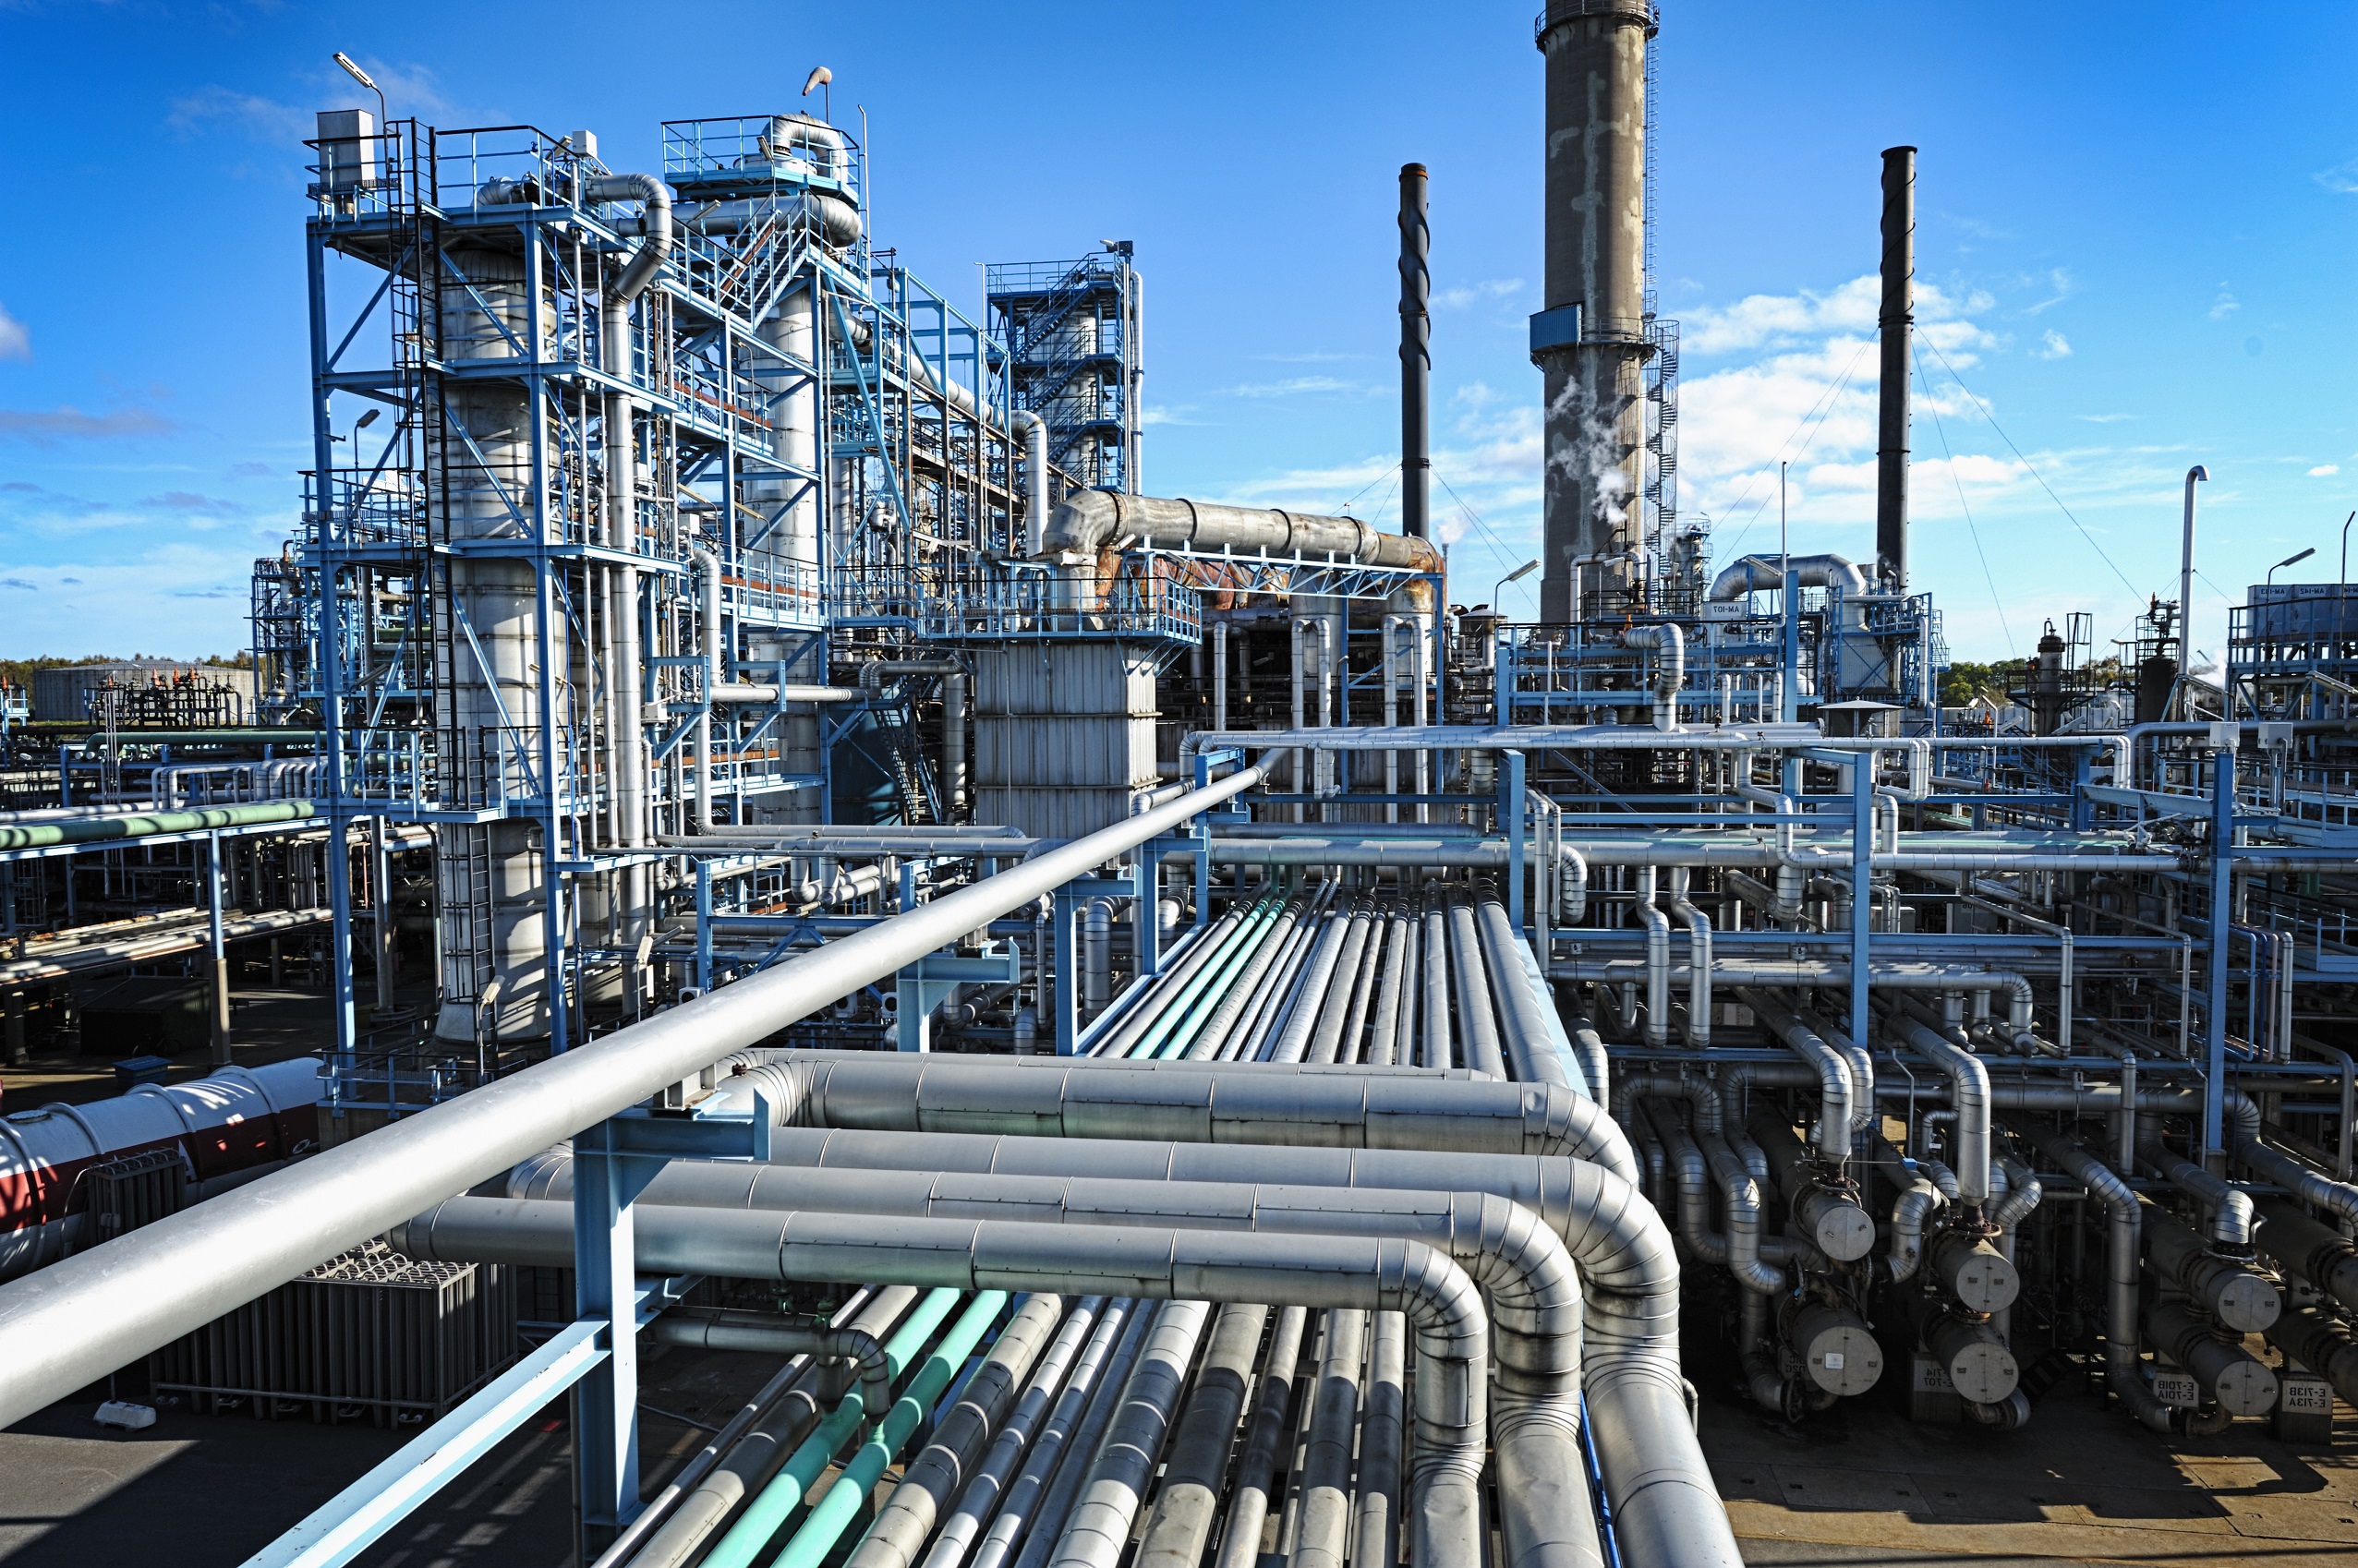 Benefits of Safety Management Software for Oil and Gas Refineries